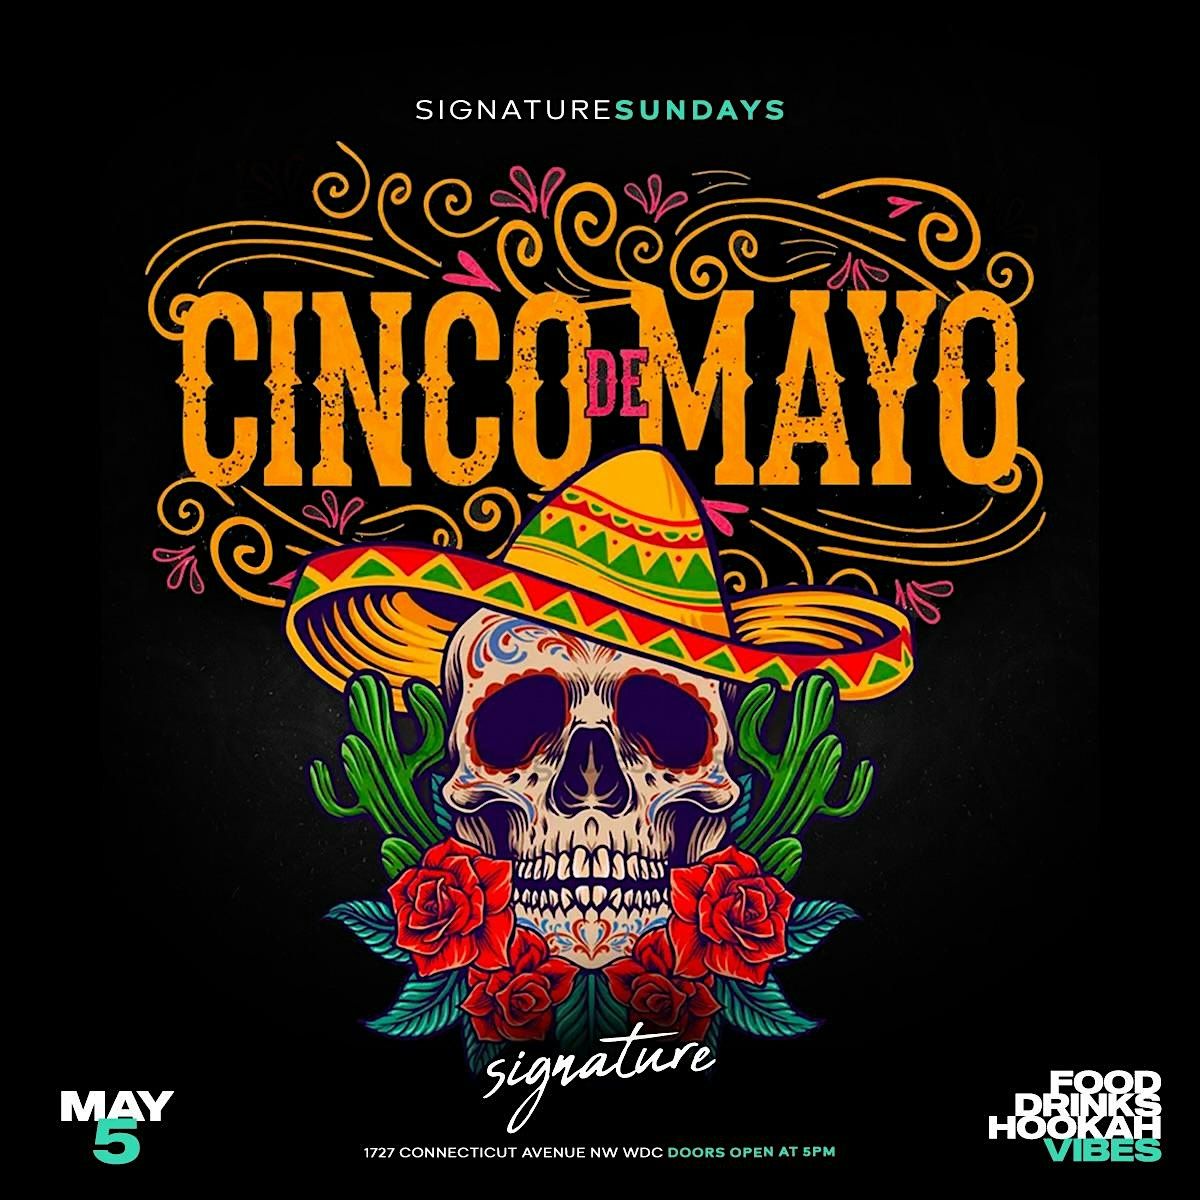 THE CINCO DE MAYO PARTY at SIGNATURE LOUNGE